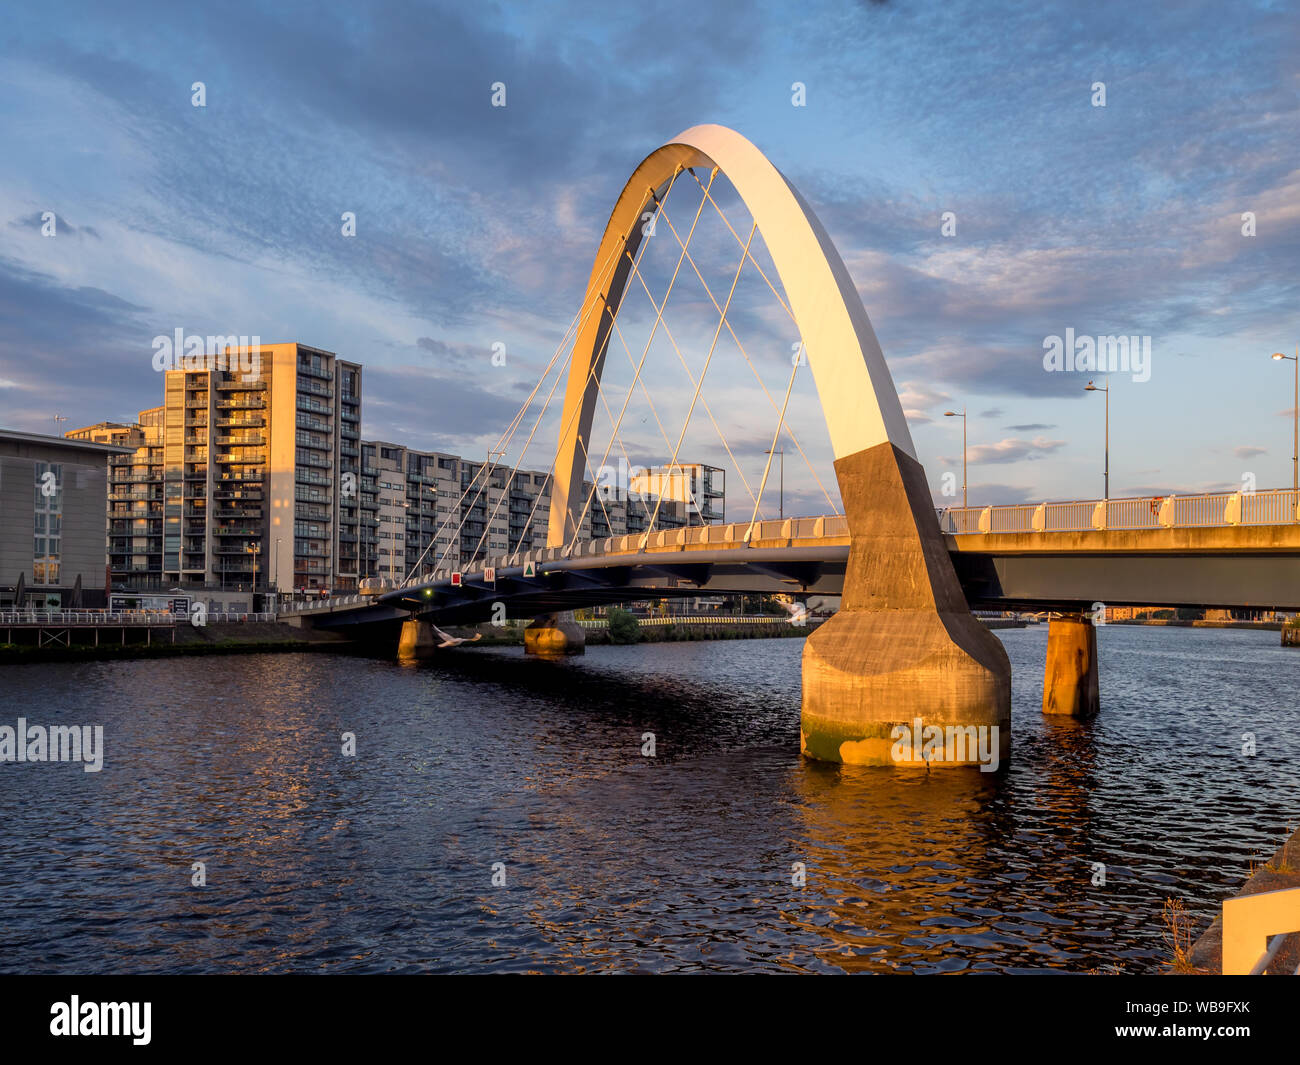 The River Clyde with the Clyde Arc Bridge on July 21, 2017 in Glasgow, Scotland. Glaswegians call the Clyde Arc the squinty bridge due to its meanderi Stock Photo